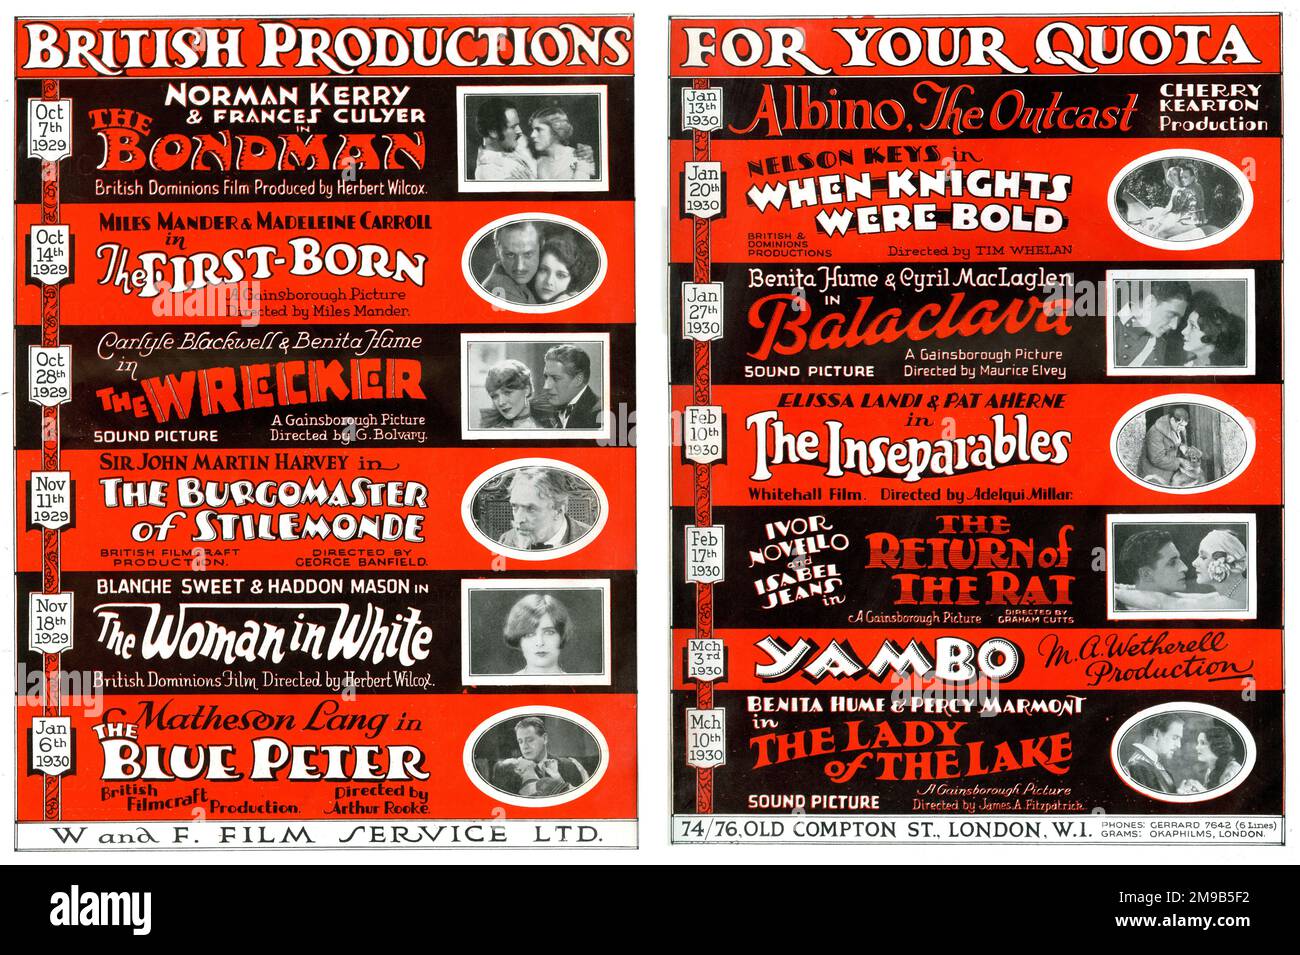 British Productions films 1929 and 1930 - The Bondman, The First-Born, The Wrecker, The Burgomaster of Stilemonde, The Woman in White, The Blue Peter, Albino the Outcast, When Knights Were Bold, Balaclava, The Inseparables, The Return of the Rat, Yambo, and The Lady of th Lake. Stock Photo